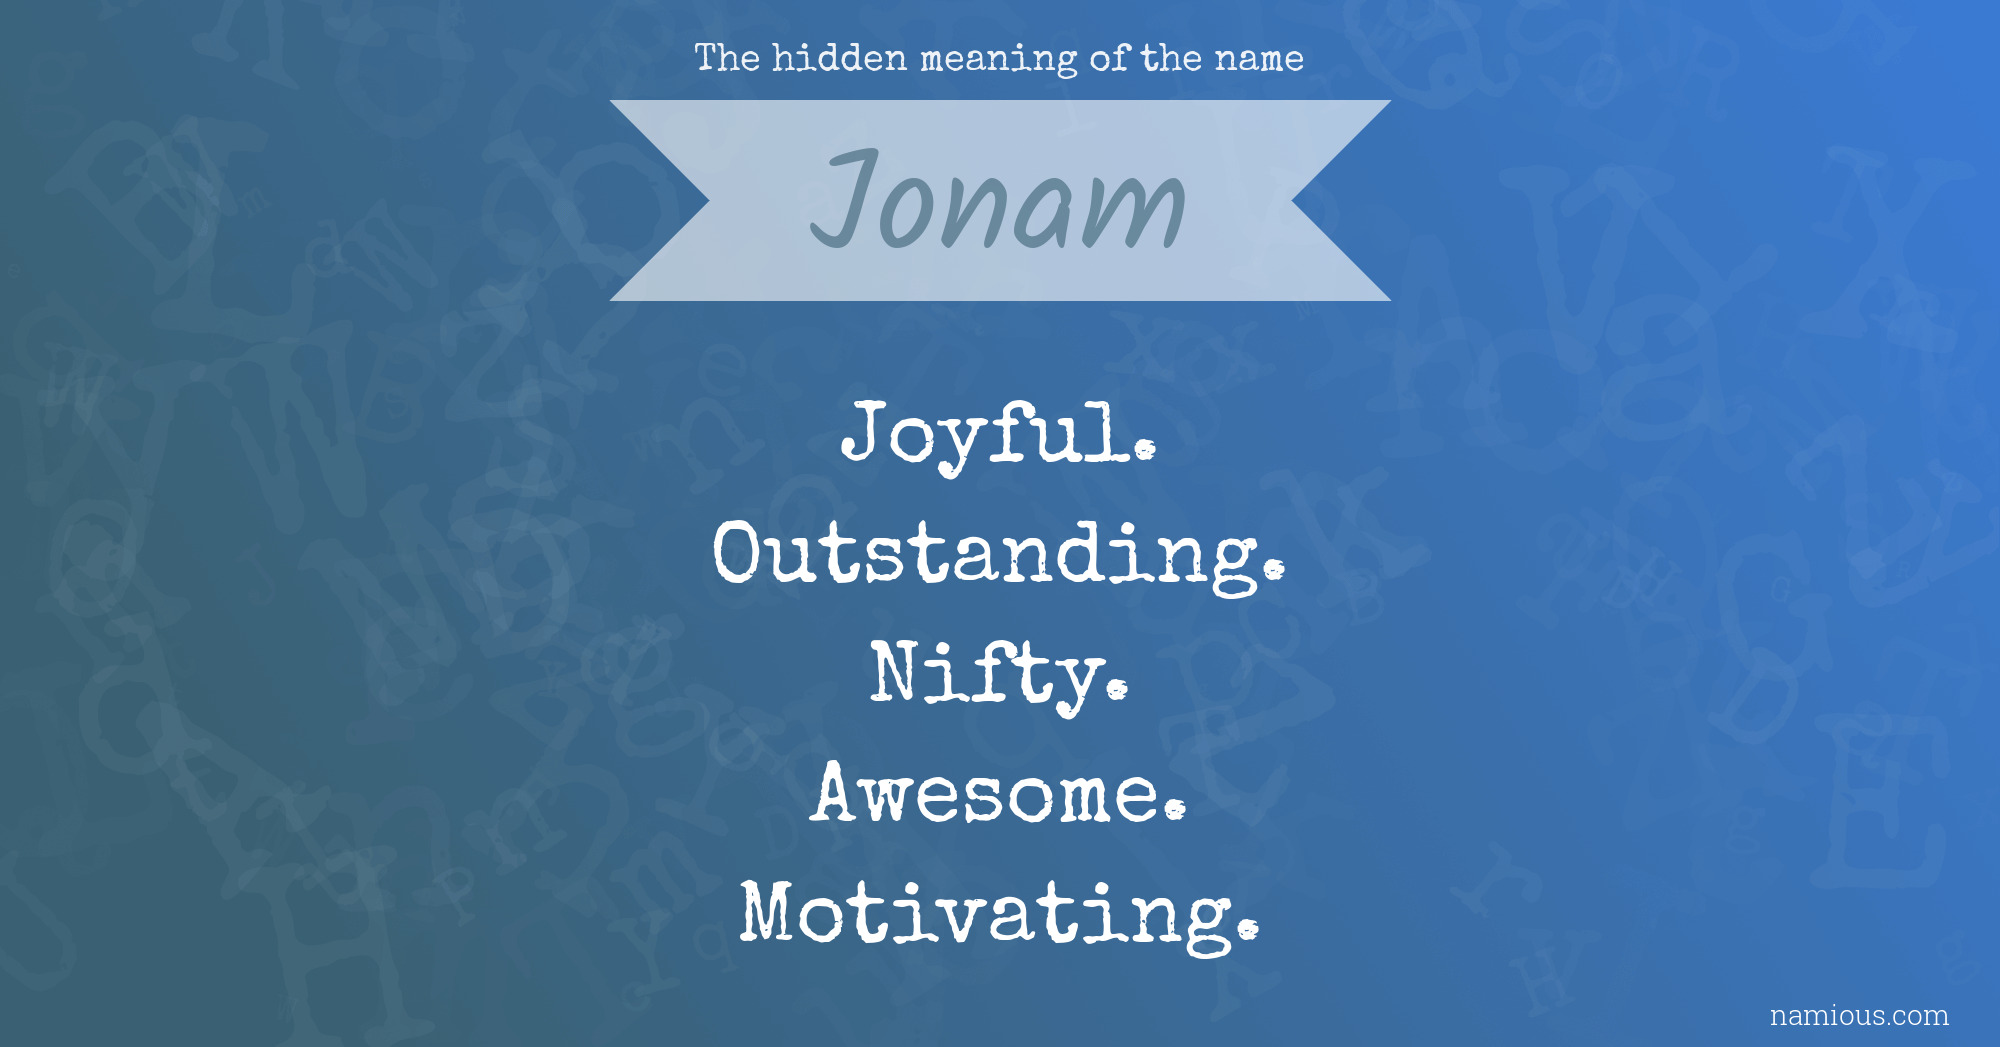 The hidden meaning of the name Jonam